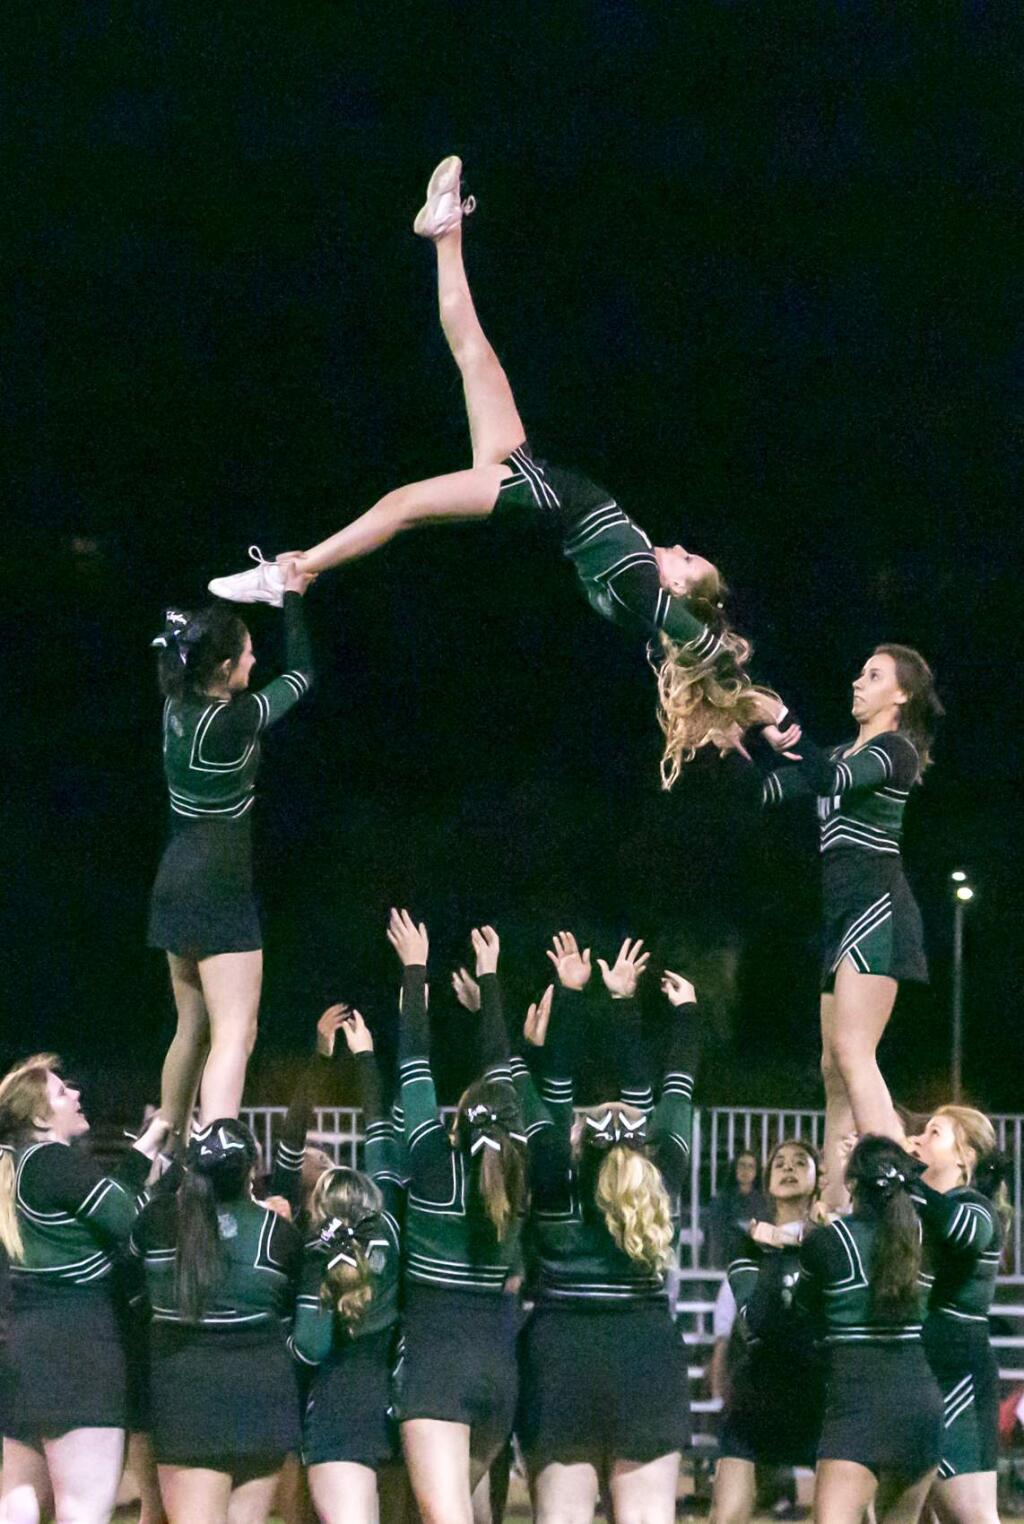 Cheerleaders for the Sonoma Valley High School football team at the Dragons' home game vs. Montgomery, Friday, Sept. 16, 2016. (Photo by Julie Vader/special to the Index-Tribune)